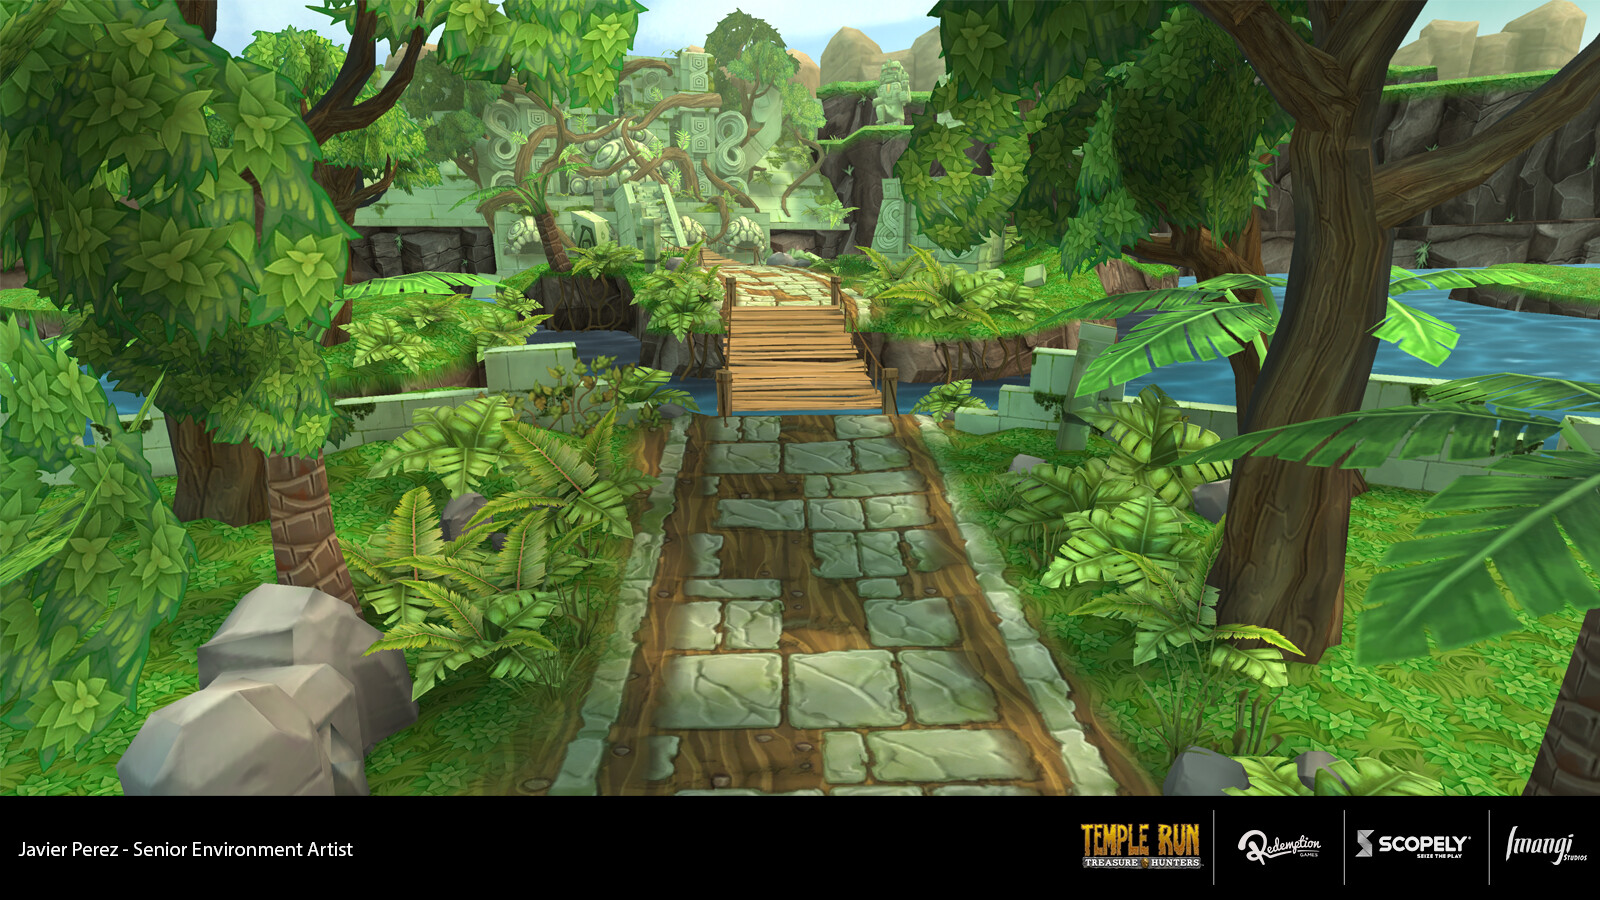 temple run unblocked at school Archives - MOBSEAR Gallery